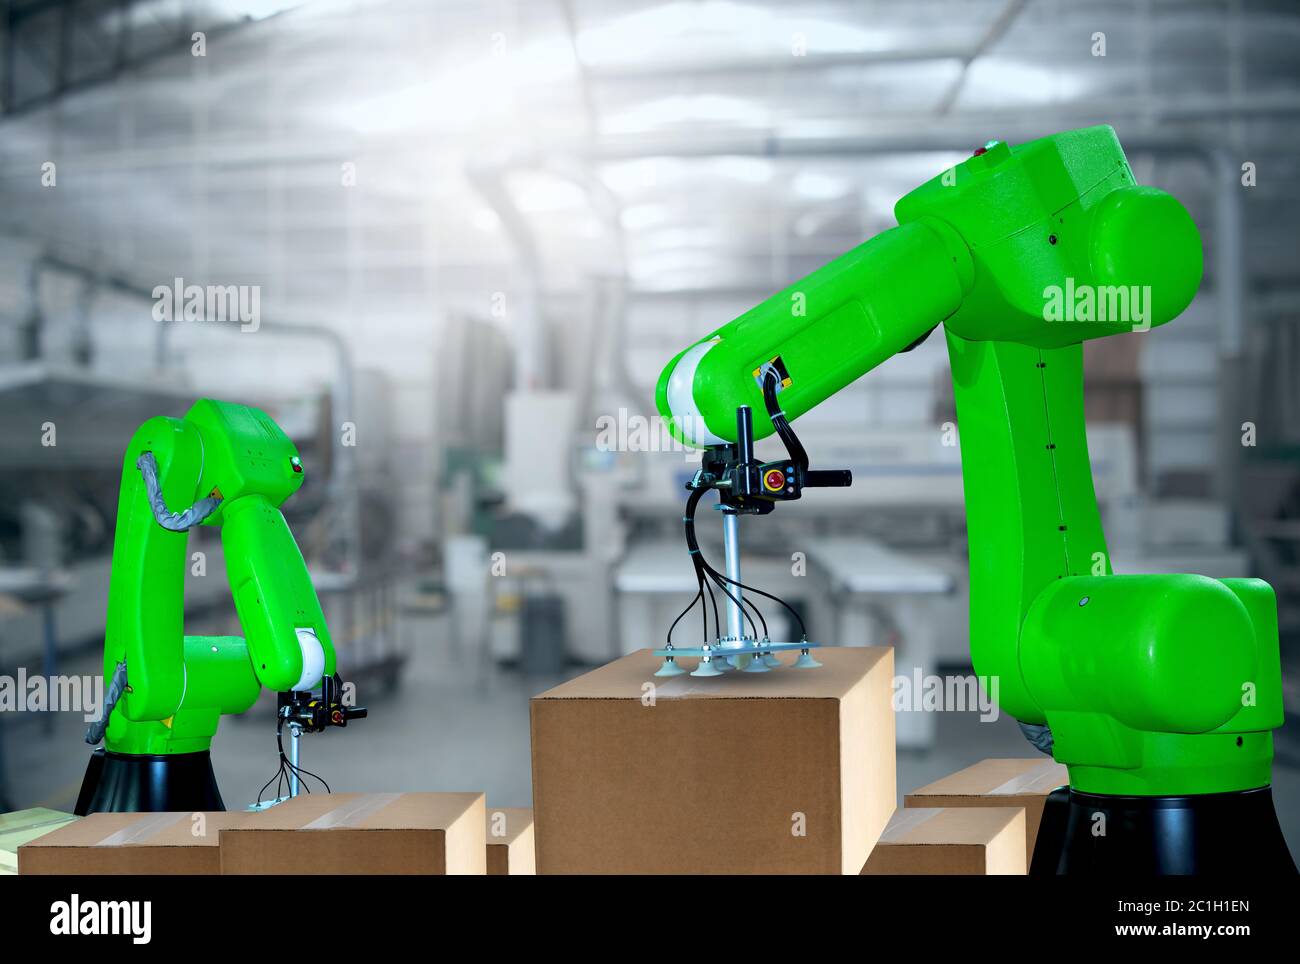 The Robotic arms carries cardboard box for delivery industry packing Stock Photo